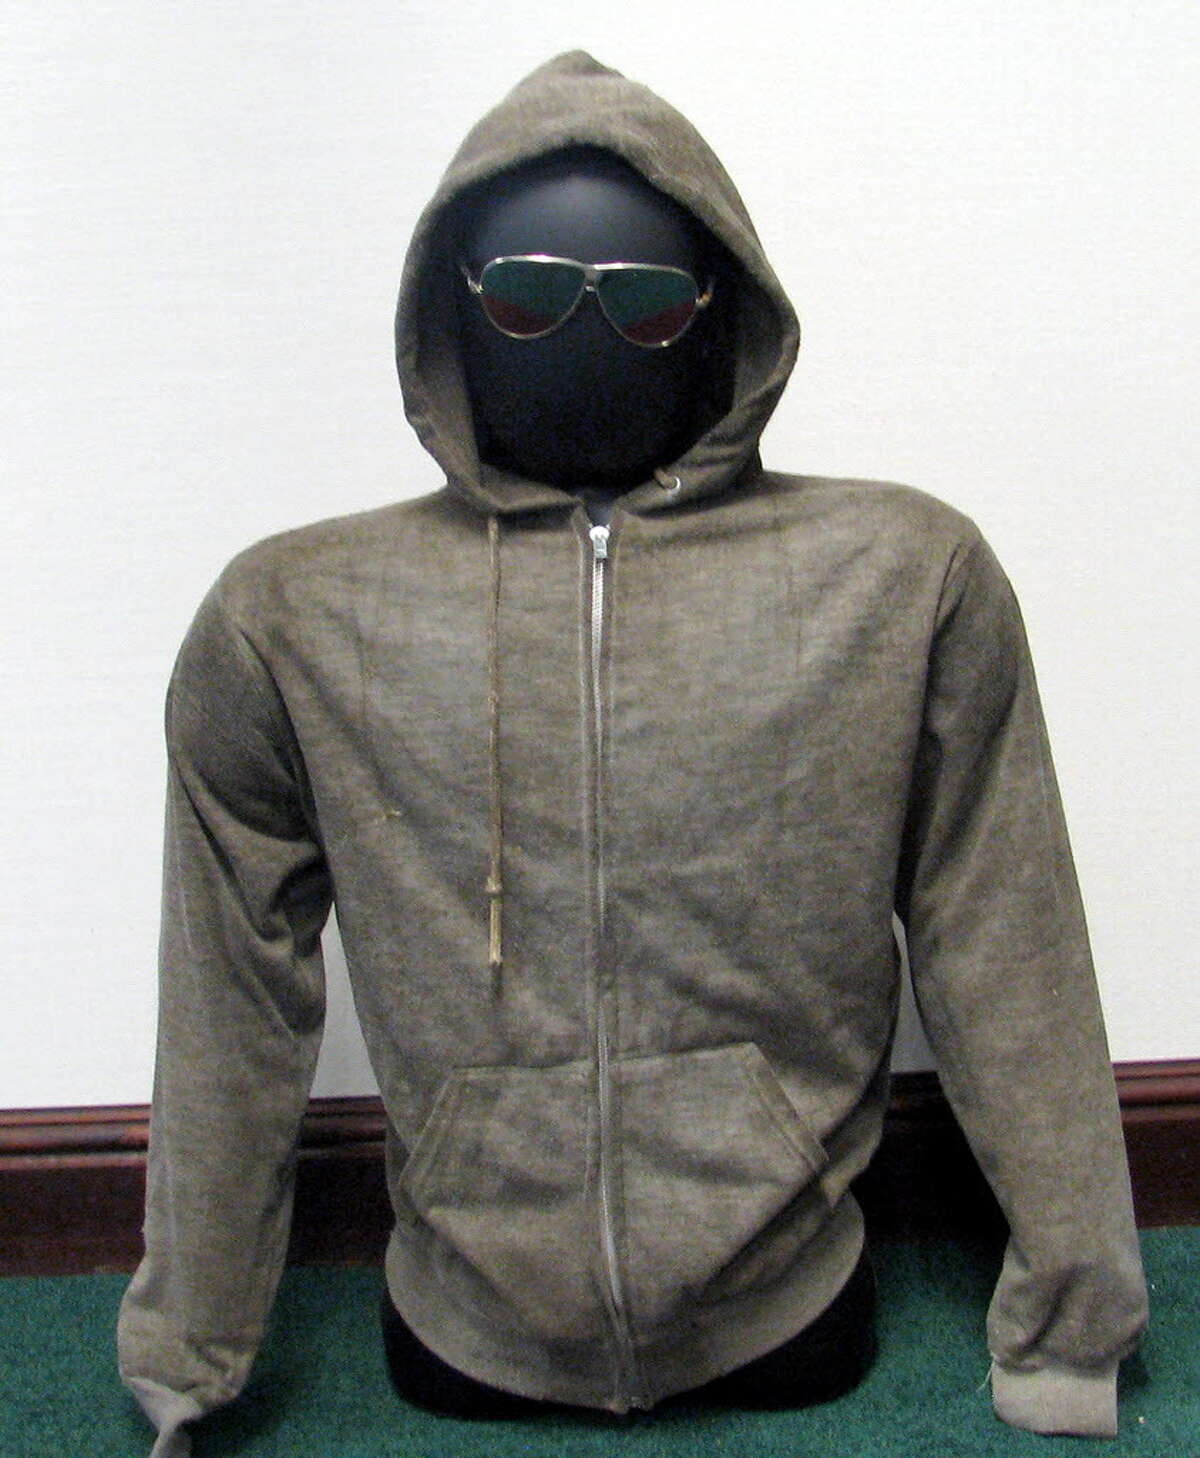 This photo released by the U.S. Marshals Service displays one of the lots being sold in an online auction of the personal effects of Ted Kaczynski, aka the ?Unabomber." The U.S. Marshals auction will run from Wednesday through June 2. Proceeds from the auction will be used to compensate Kaczynski's victims.